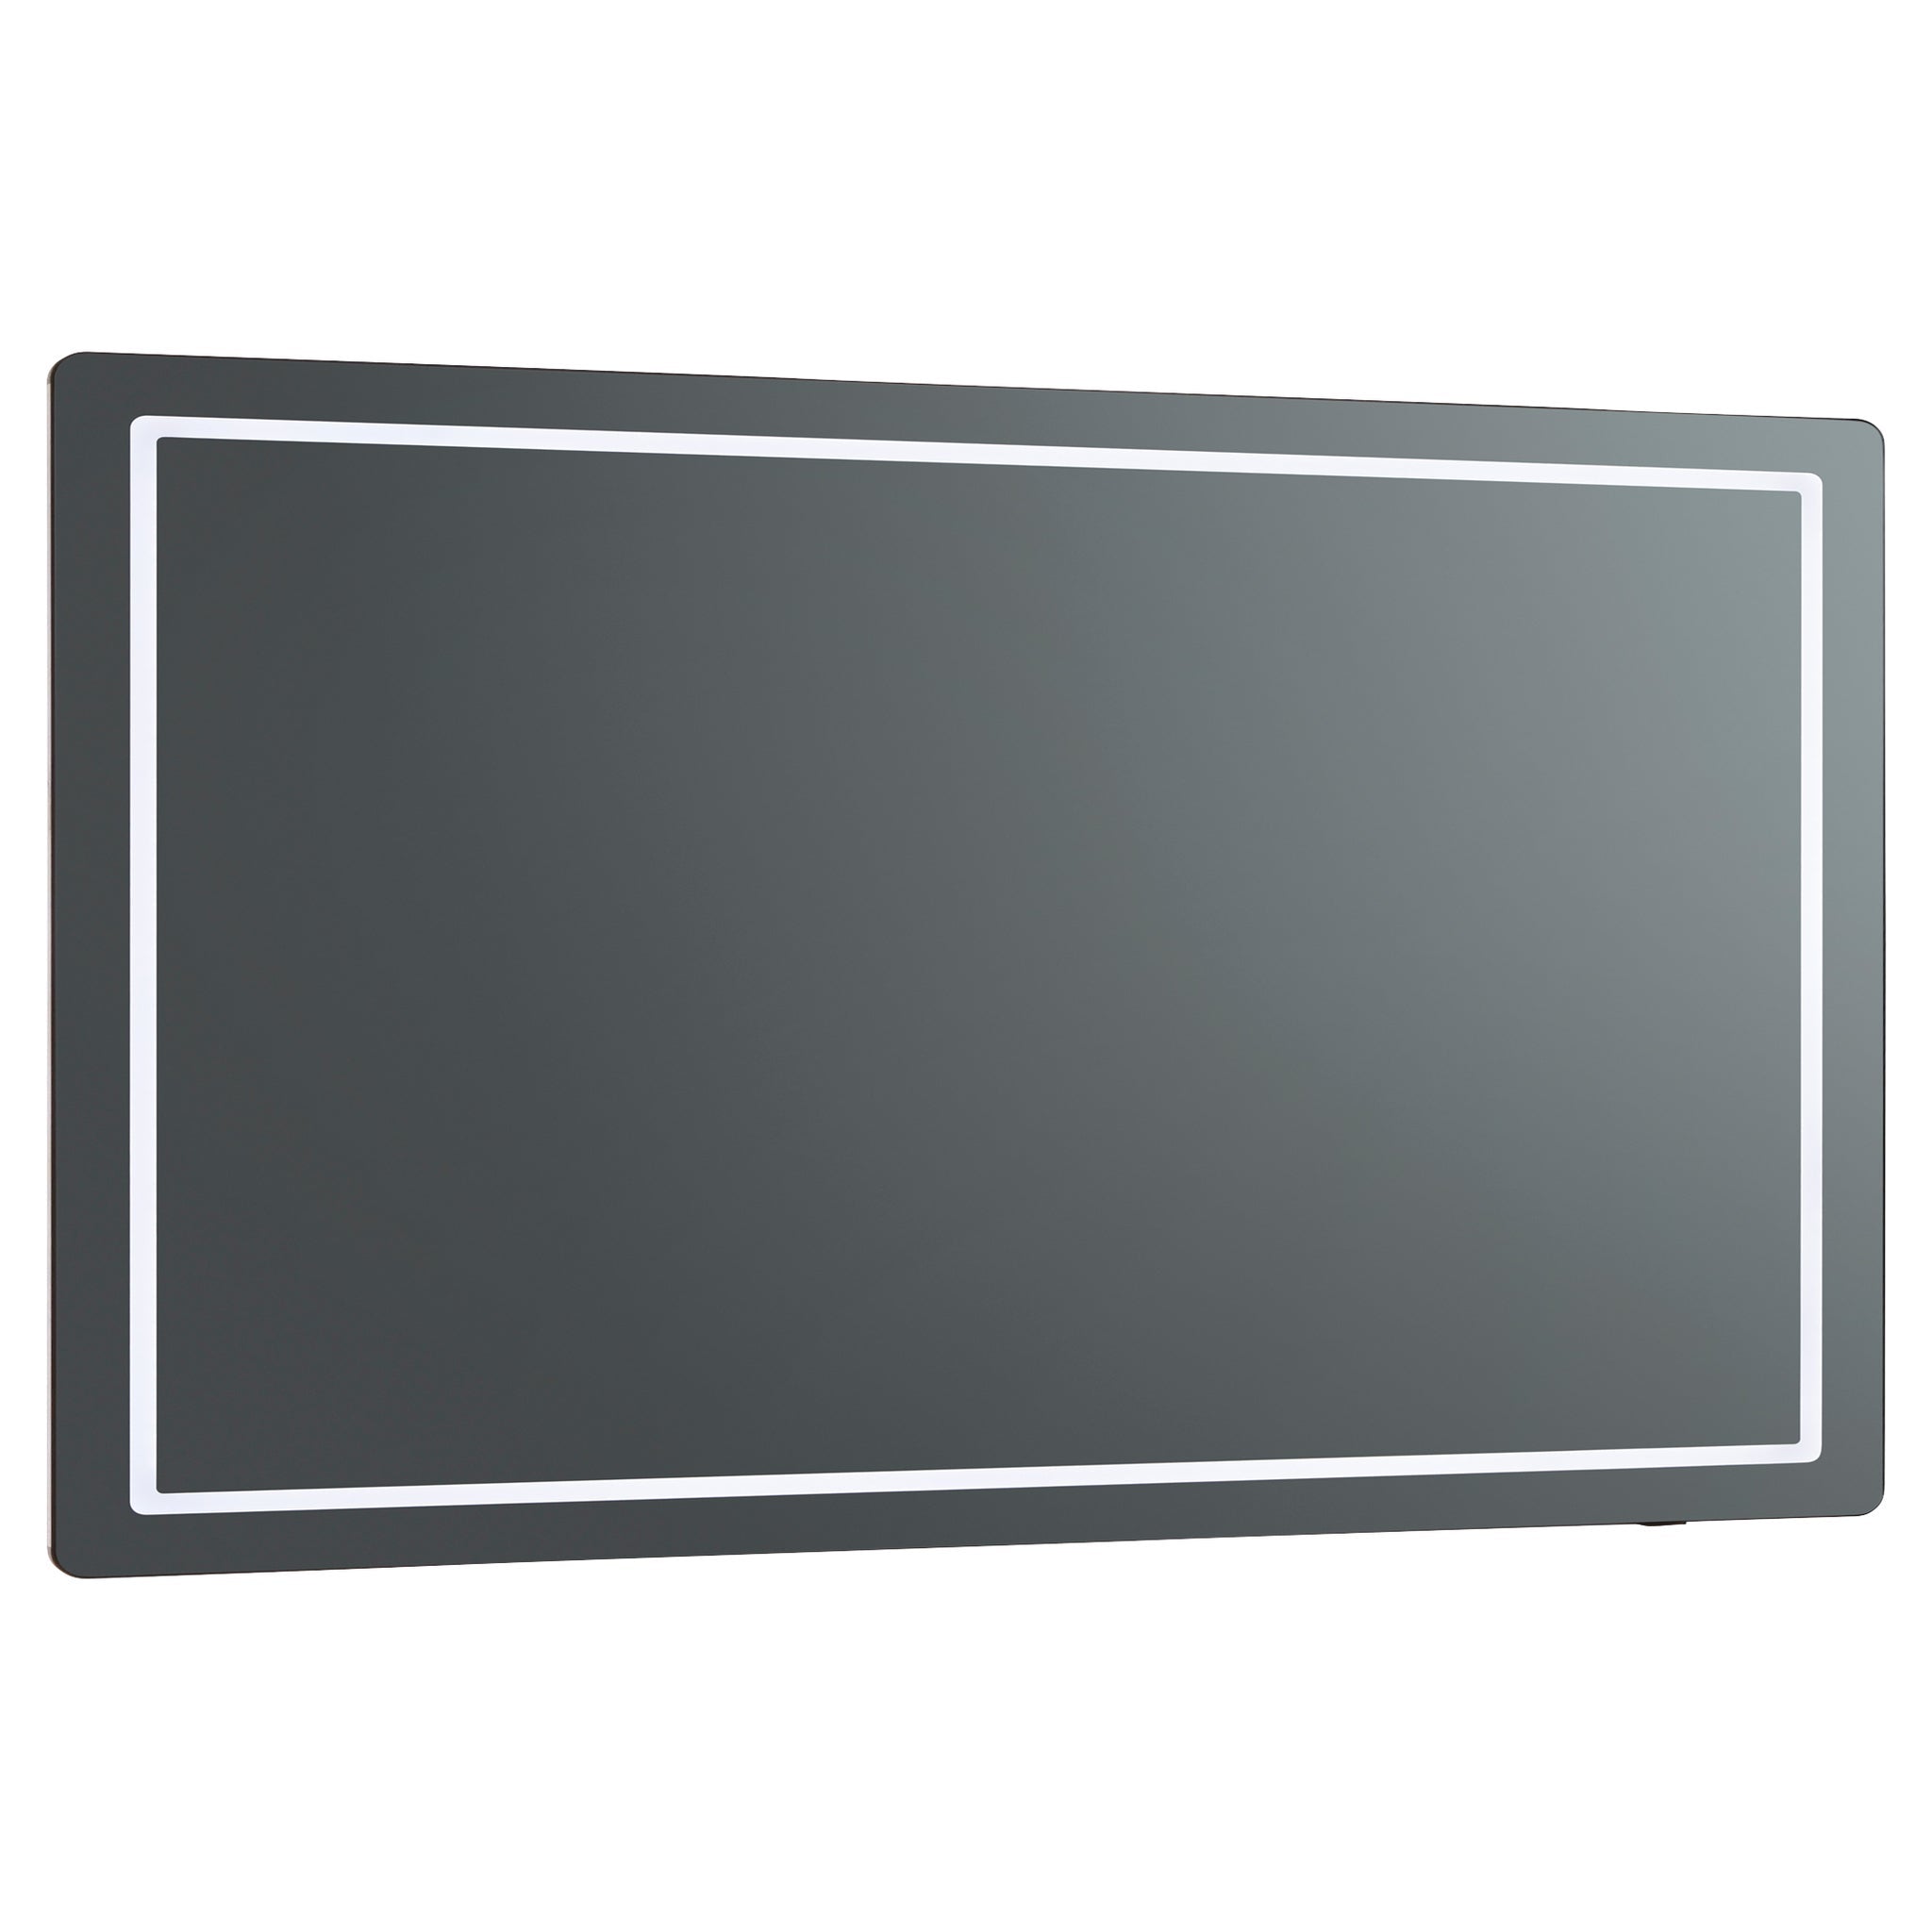 Oxygen Compact 3-0401-15 LED Lighted Mirror - Black